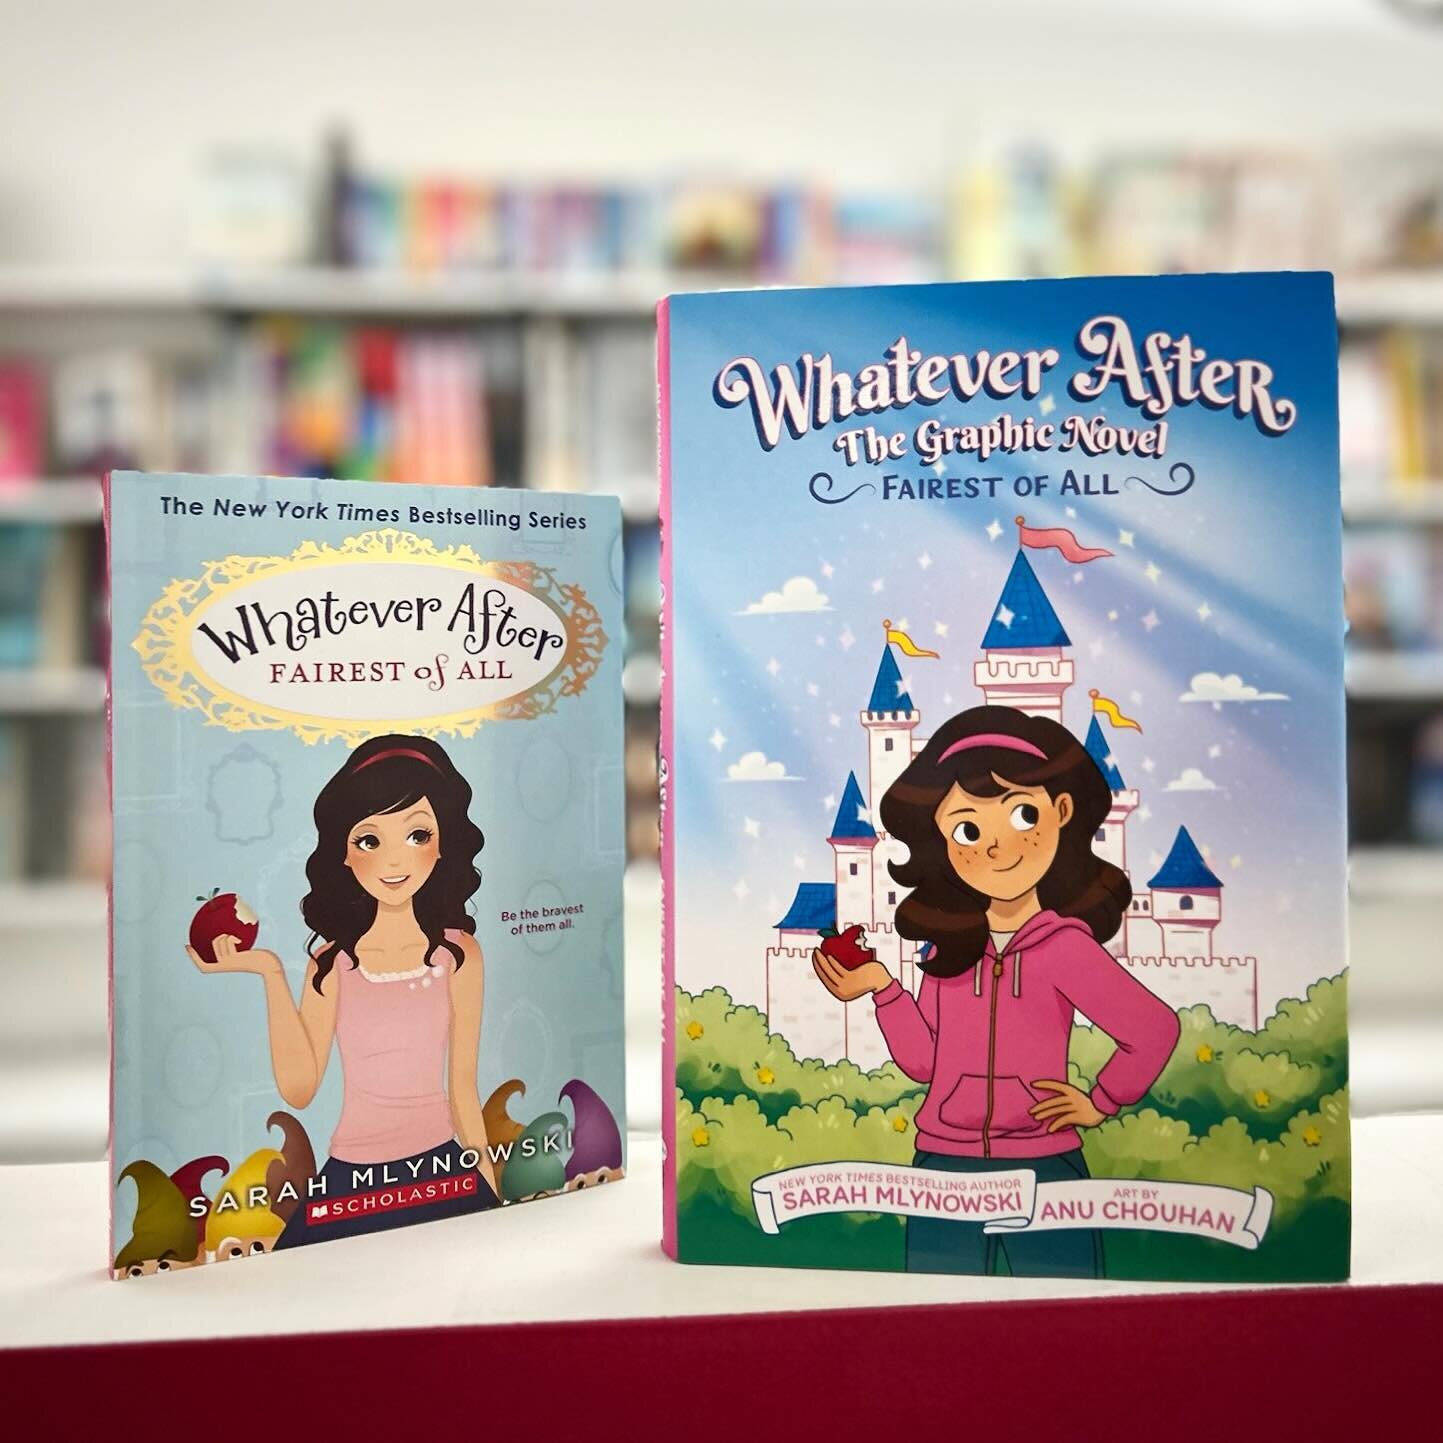 What a fun day! WHATEVER AFTER: Fairest of All is now out as a graphic novel. We love seeing the two editions of Sarah Mlynowski&rsquo;s incredibly fun book together. We hope a whole new batch of kids falls in love with this series of fractured fairy